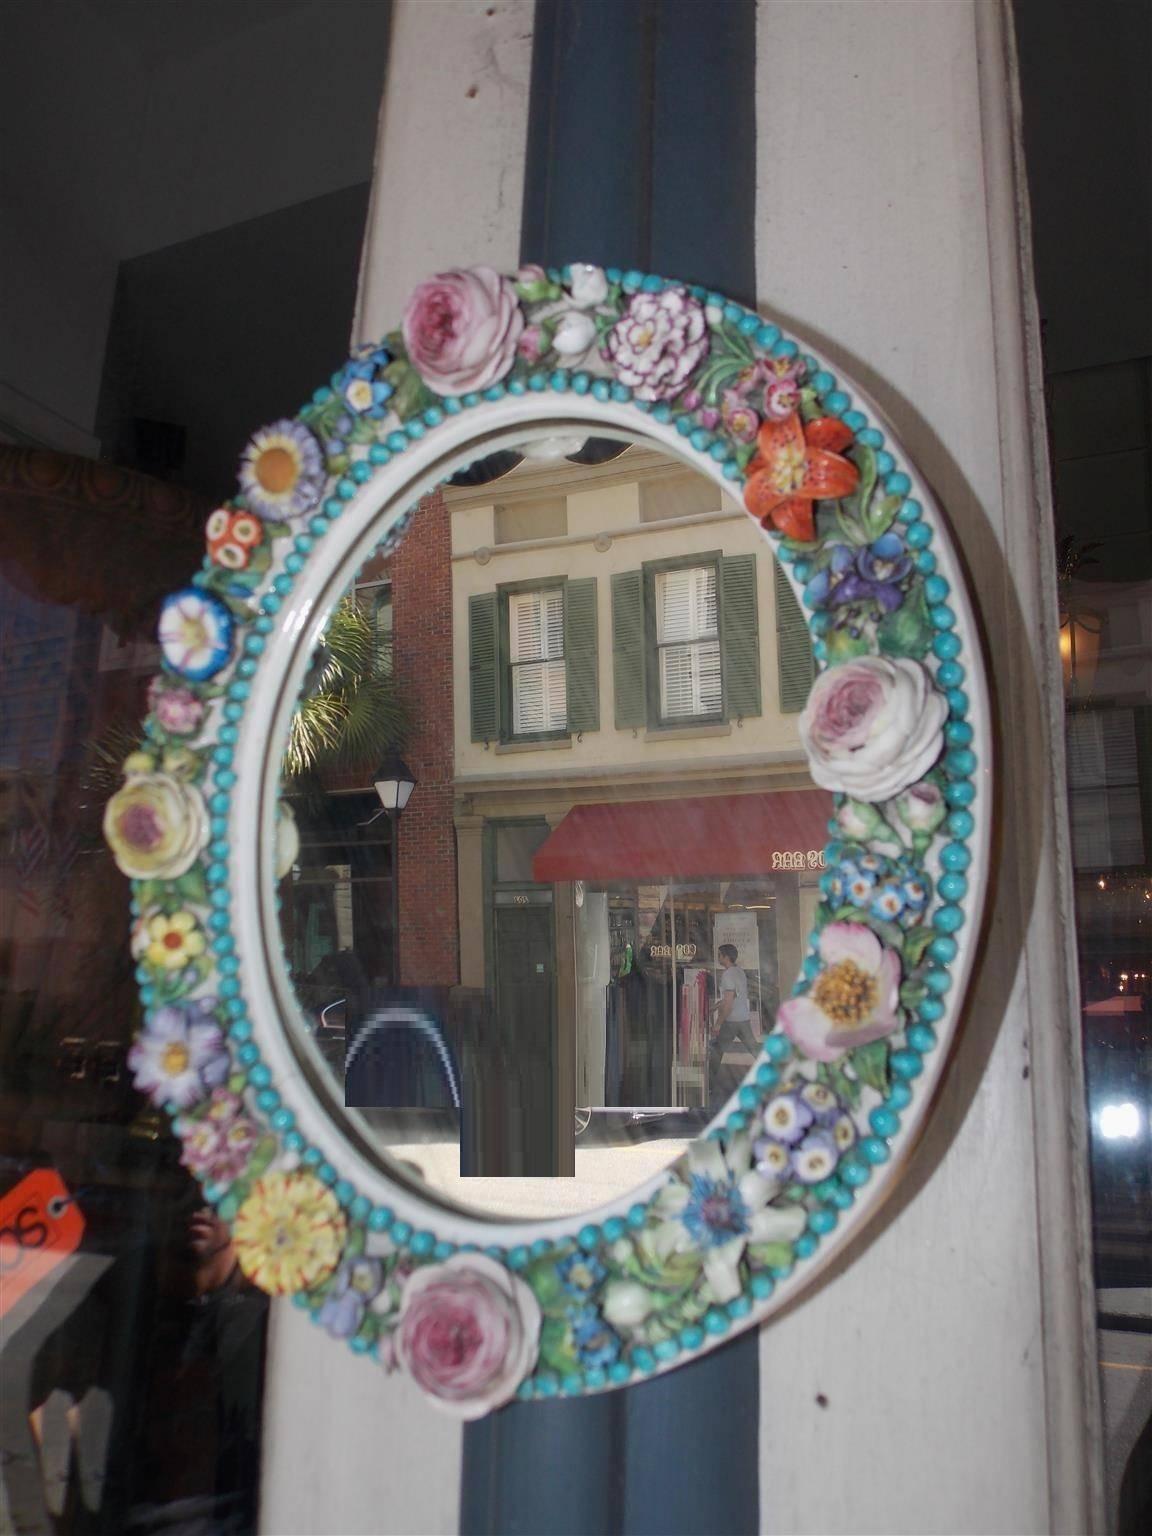 English Derby oval mirror with vibrant bead work and decorative porcelain flowers. Mirror retains the original beveled glass and paper label on back, Early 19th Century.